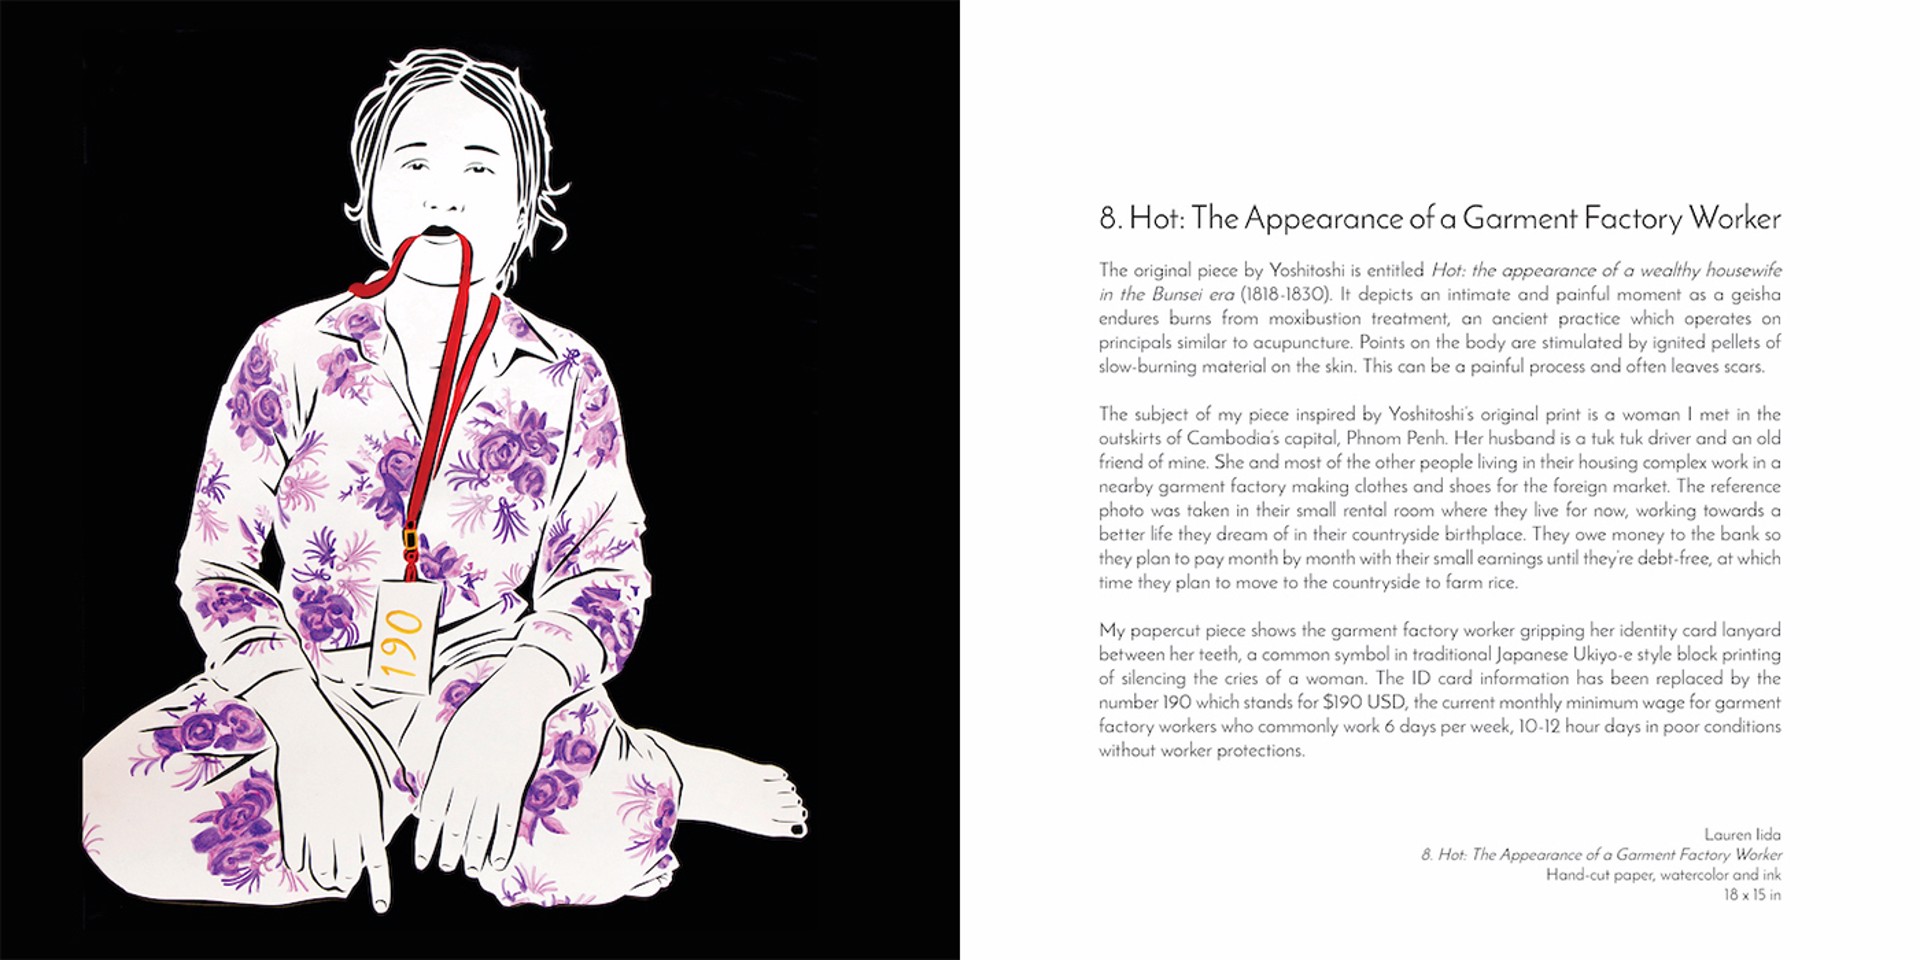 32 Aspects of Daily Life | Exhibition Catalog by Lauren Iida